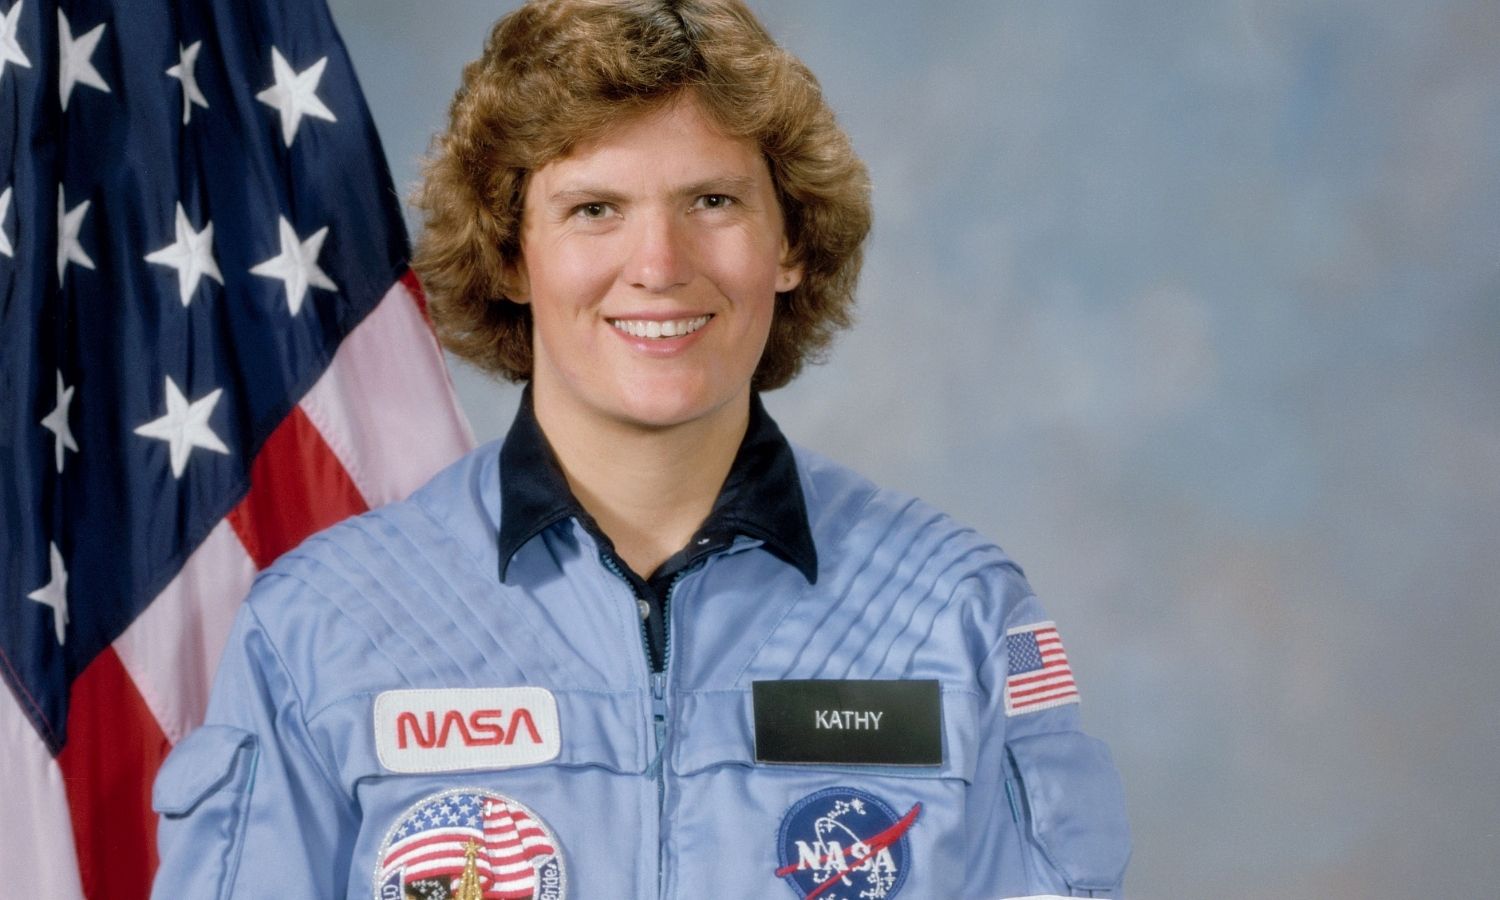 OTD in 1984: NASA astronaut Kathy Sullivan became the first woman to walk in space.